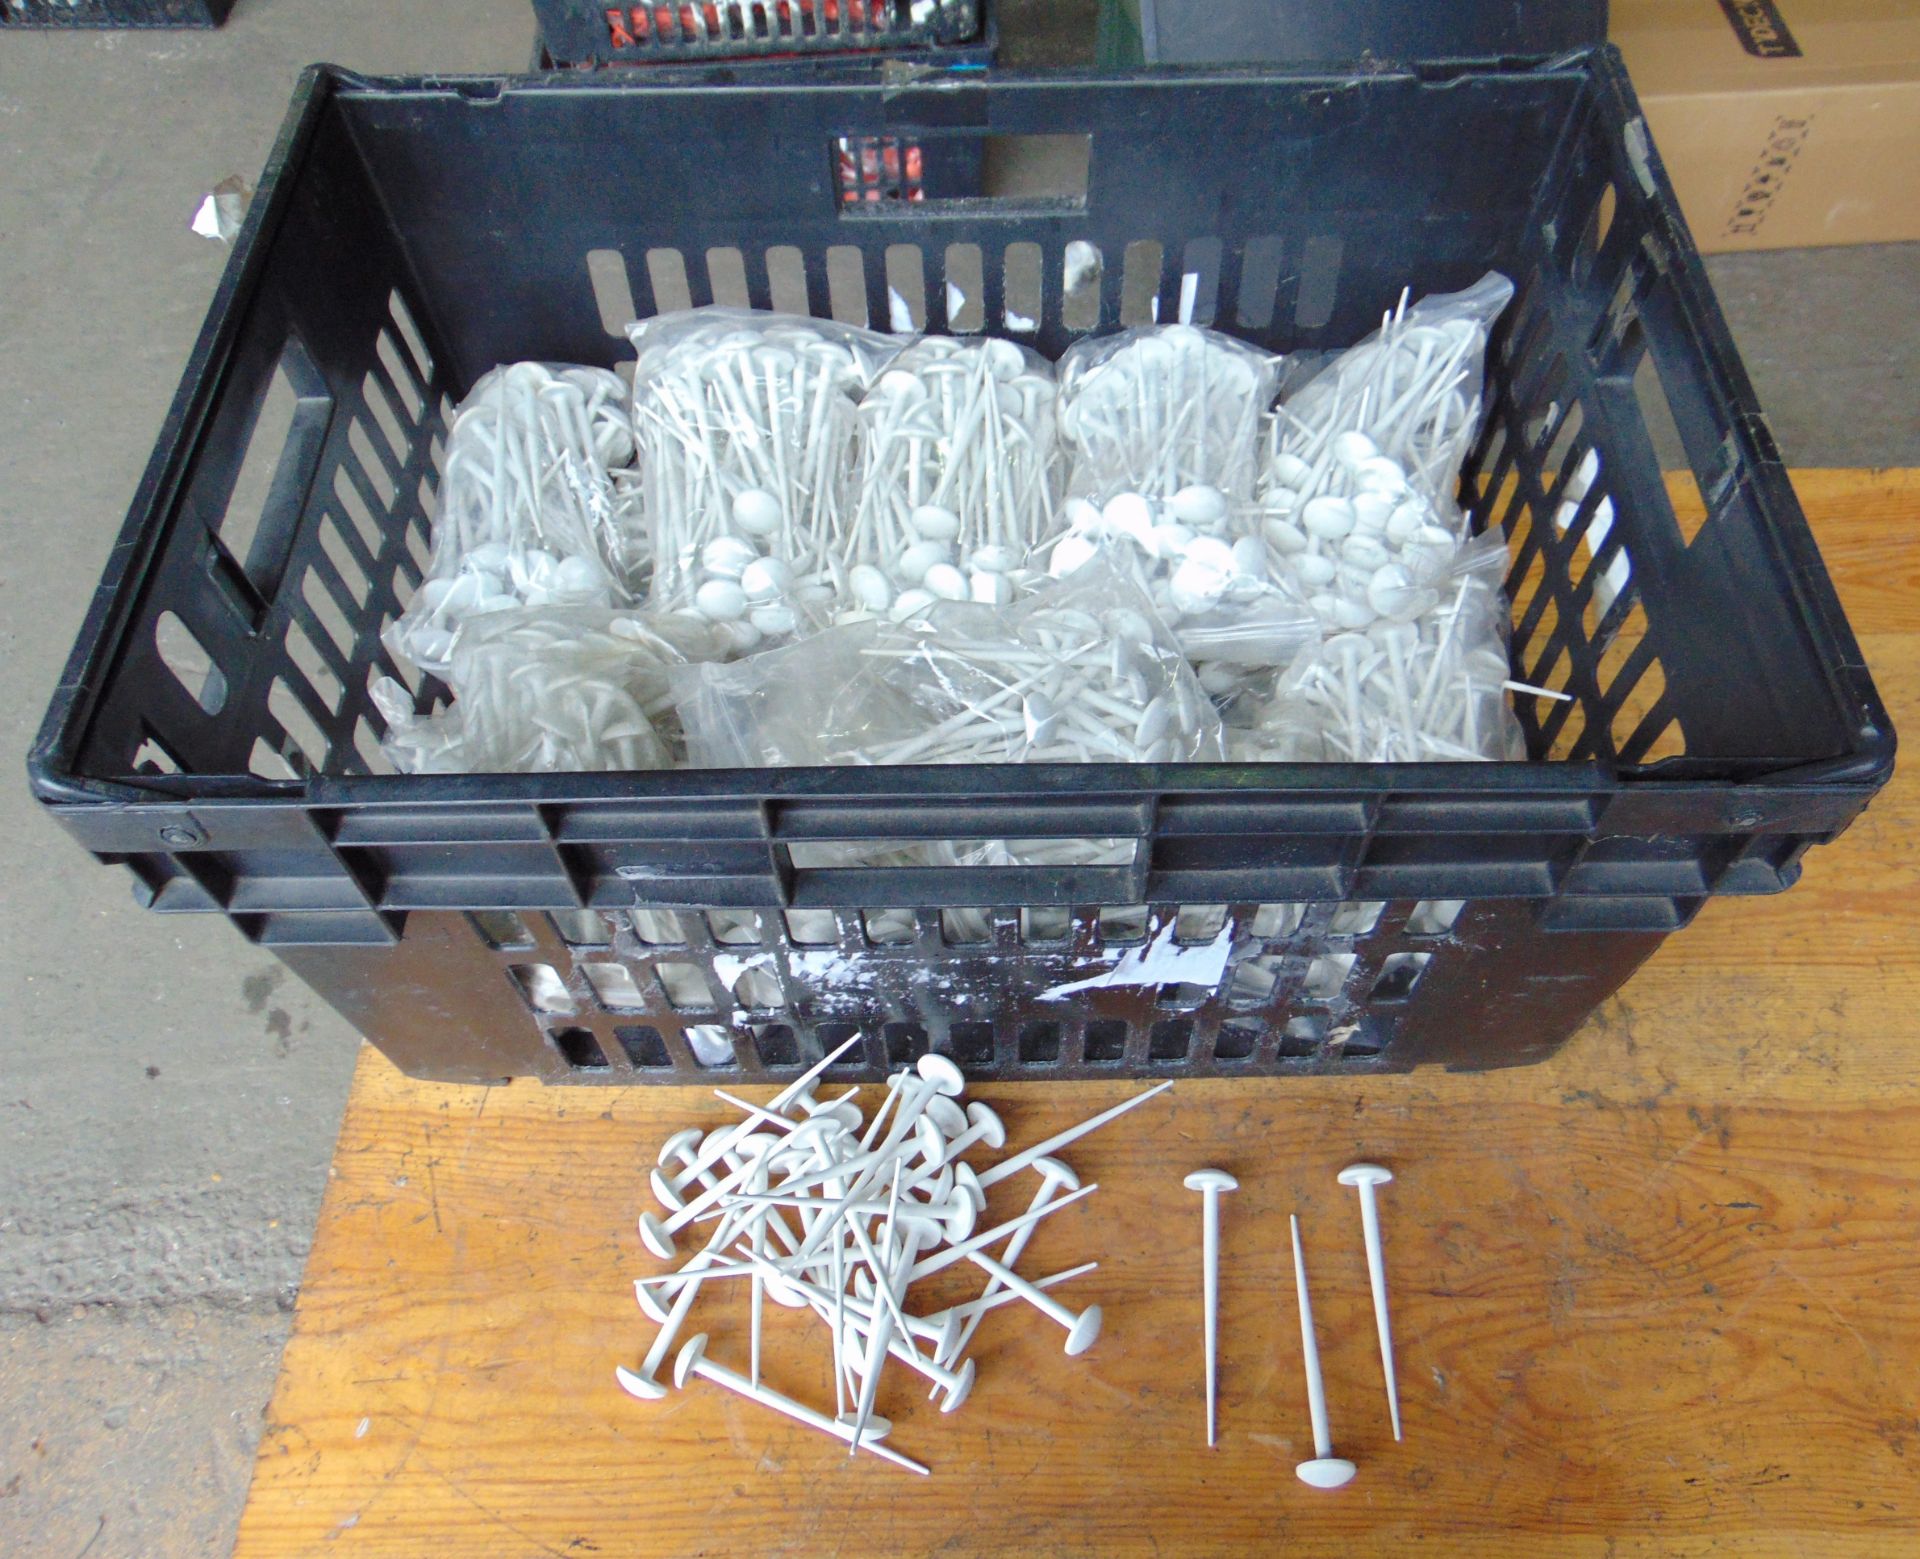 New Unissued Approx. 1000 White Plastic Ground Marking Spikes - Image 4 of 4